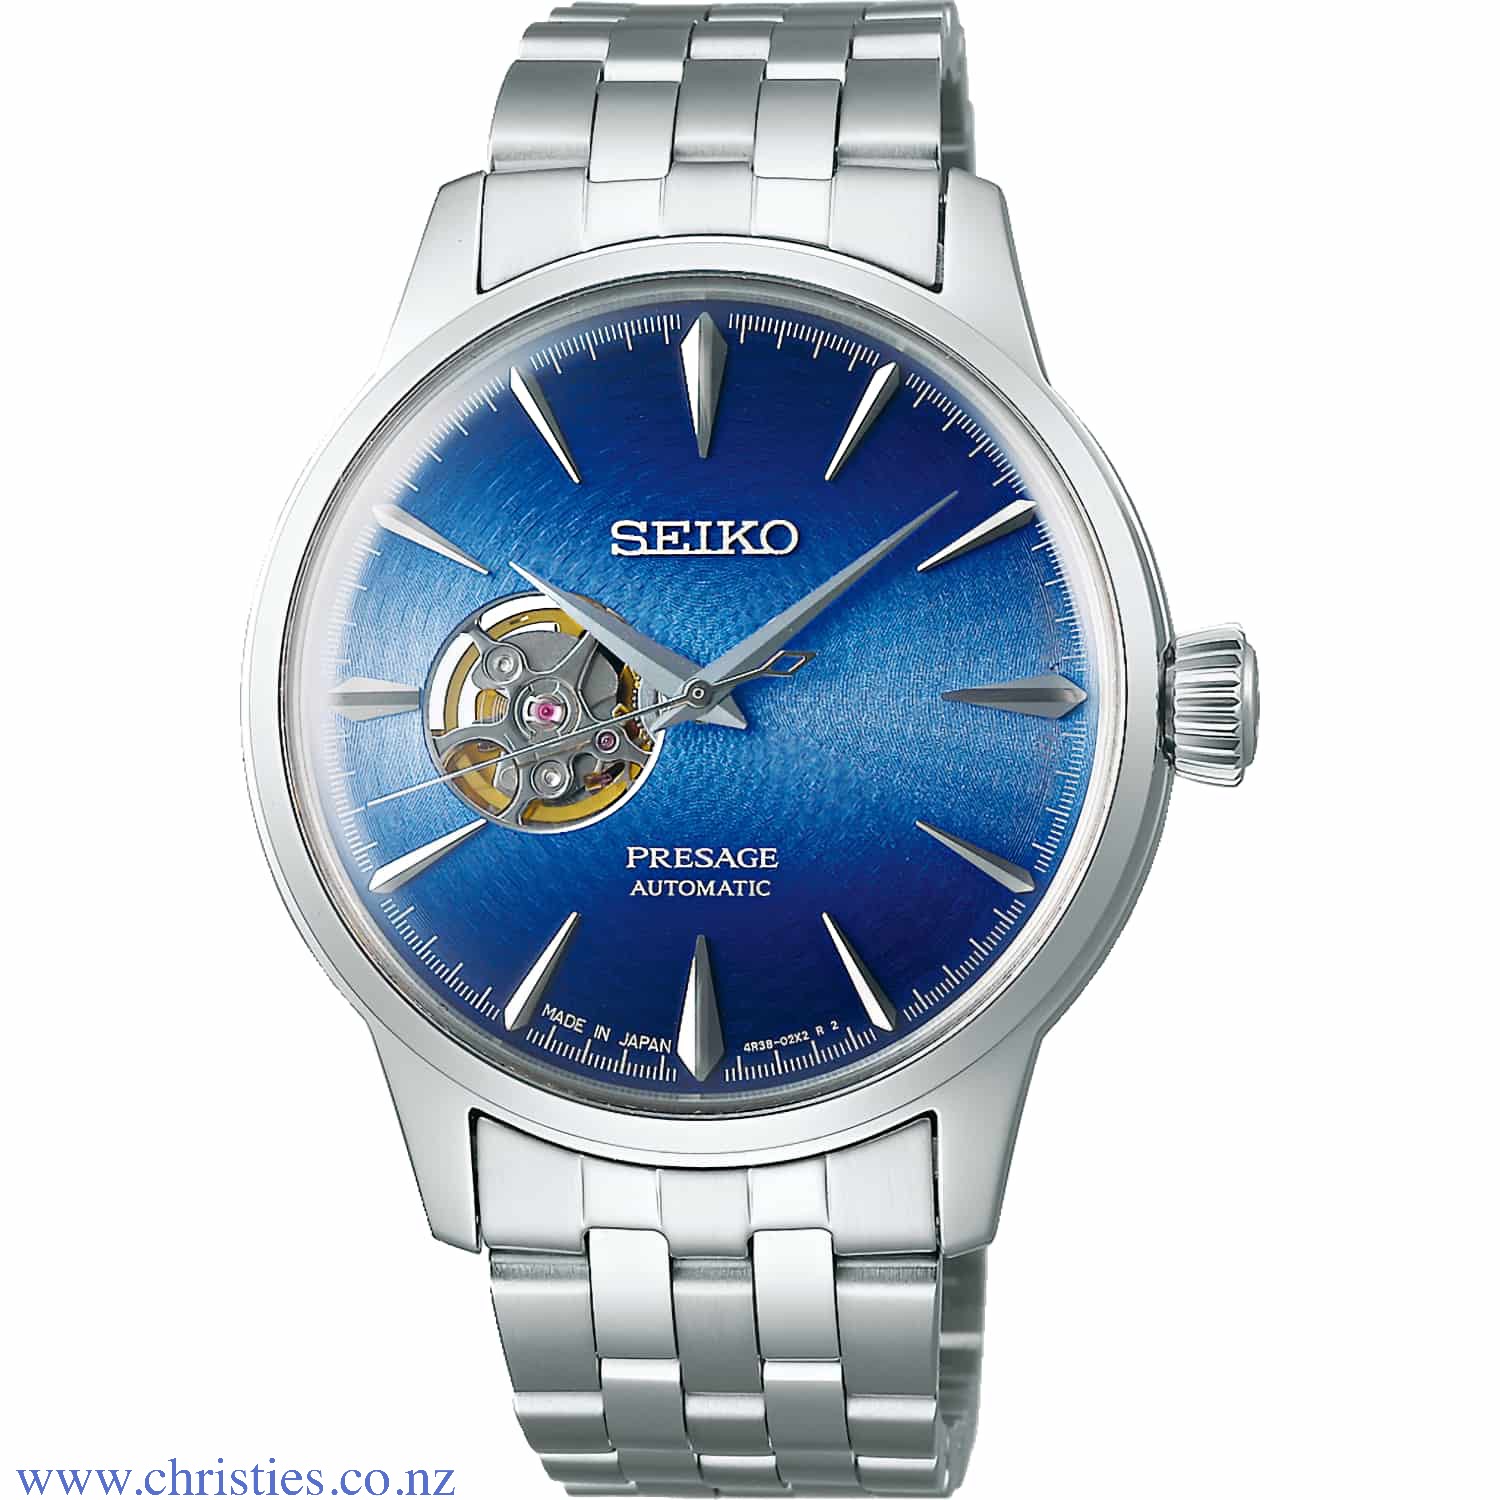 SSA439J Seiko Presage Automatic Mens Cocktail Time Watch. Seiko Presage Automatic Mens Cocktail Time Watch Inspired by the bar for you Afterpay - Split your purchase into 4 instalments - Pay for your purchase over 4 instalments, due every two weeks. You’l